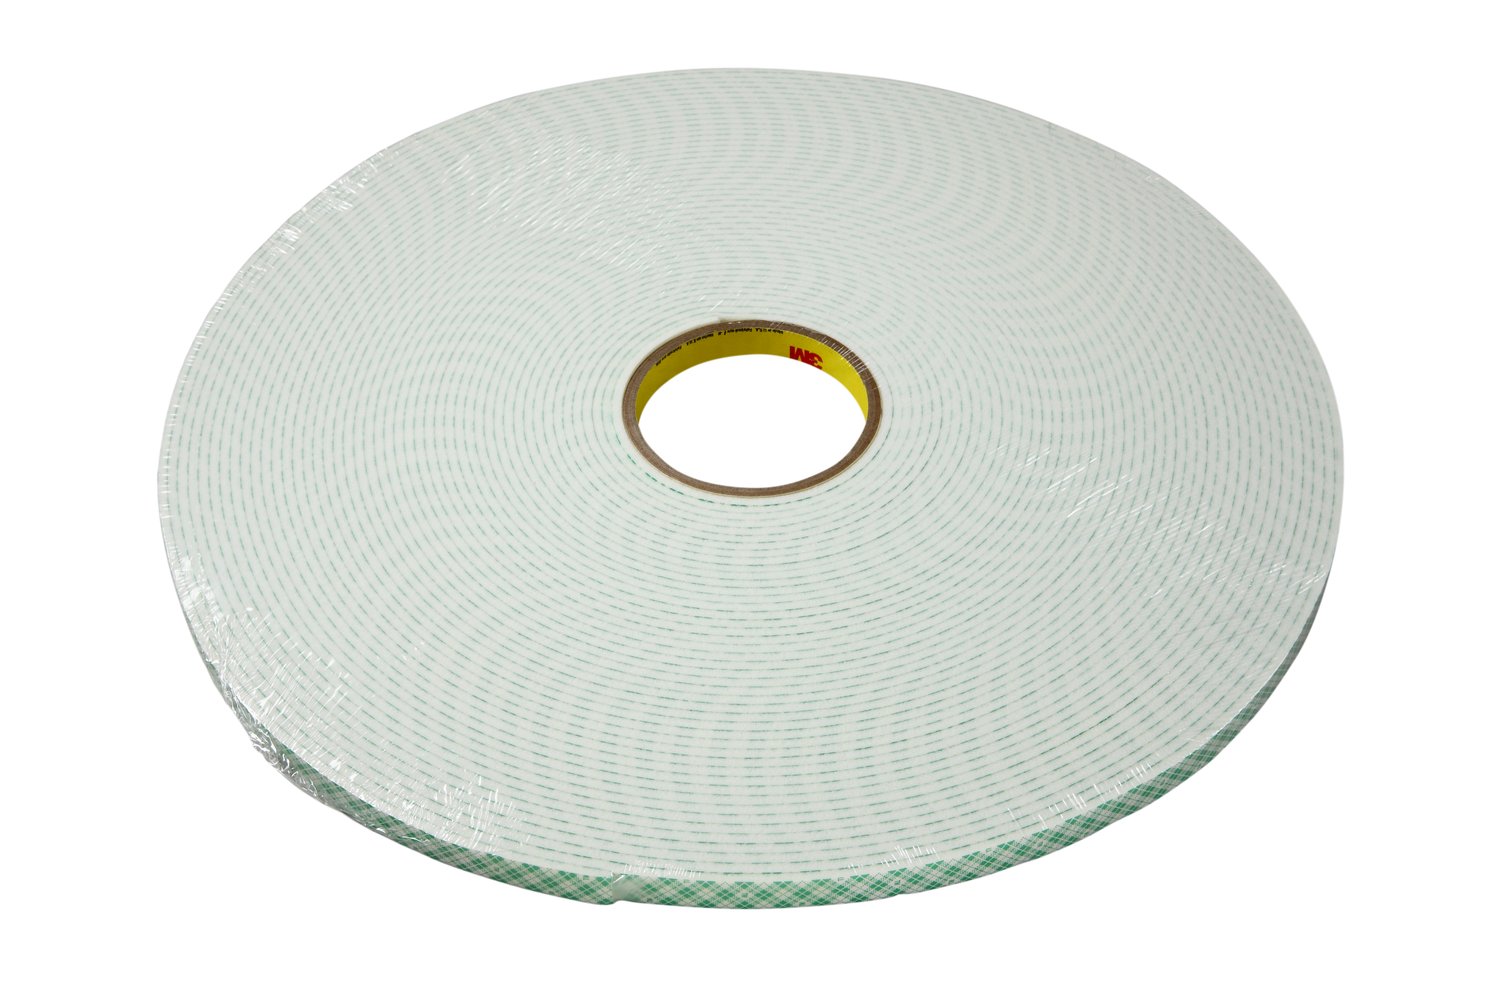 7000047506 - 3M Double Coated Urethane Foam Tape 4008, Off White, 3 in x 36 yd, 125
mil, 3 rolls per case